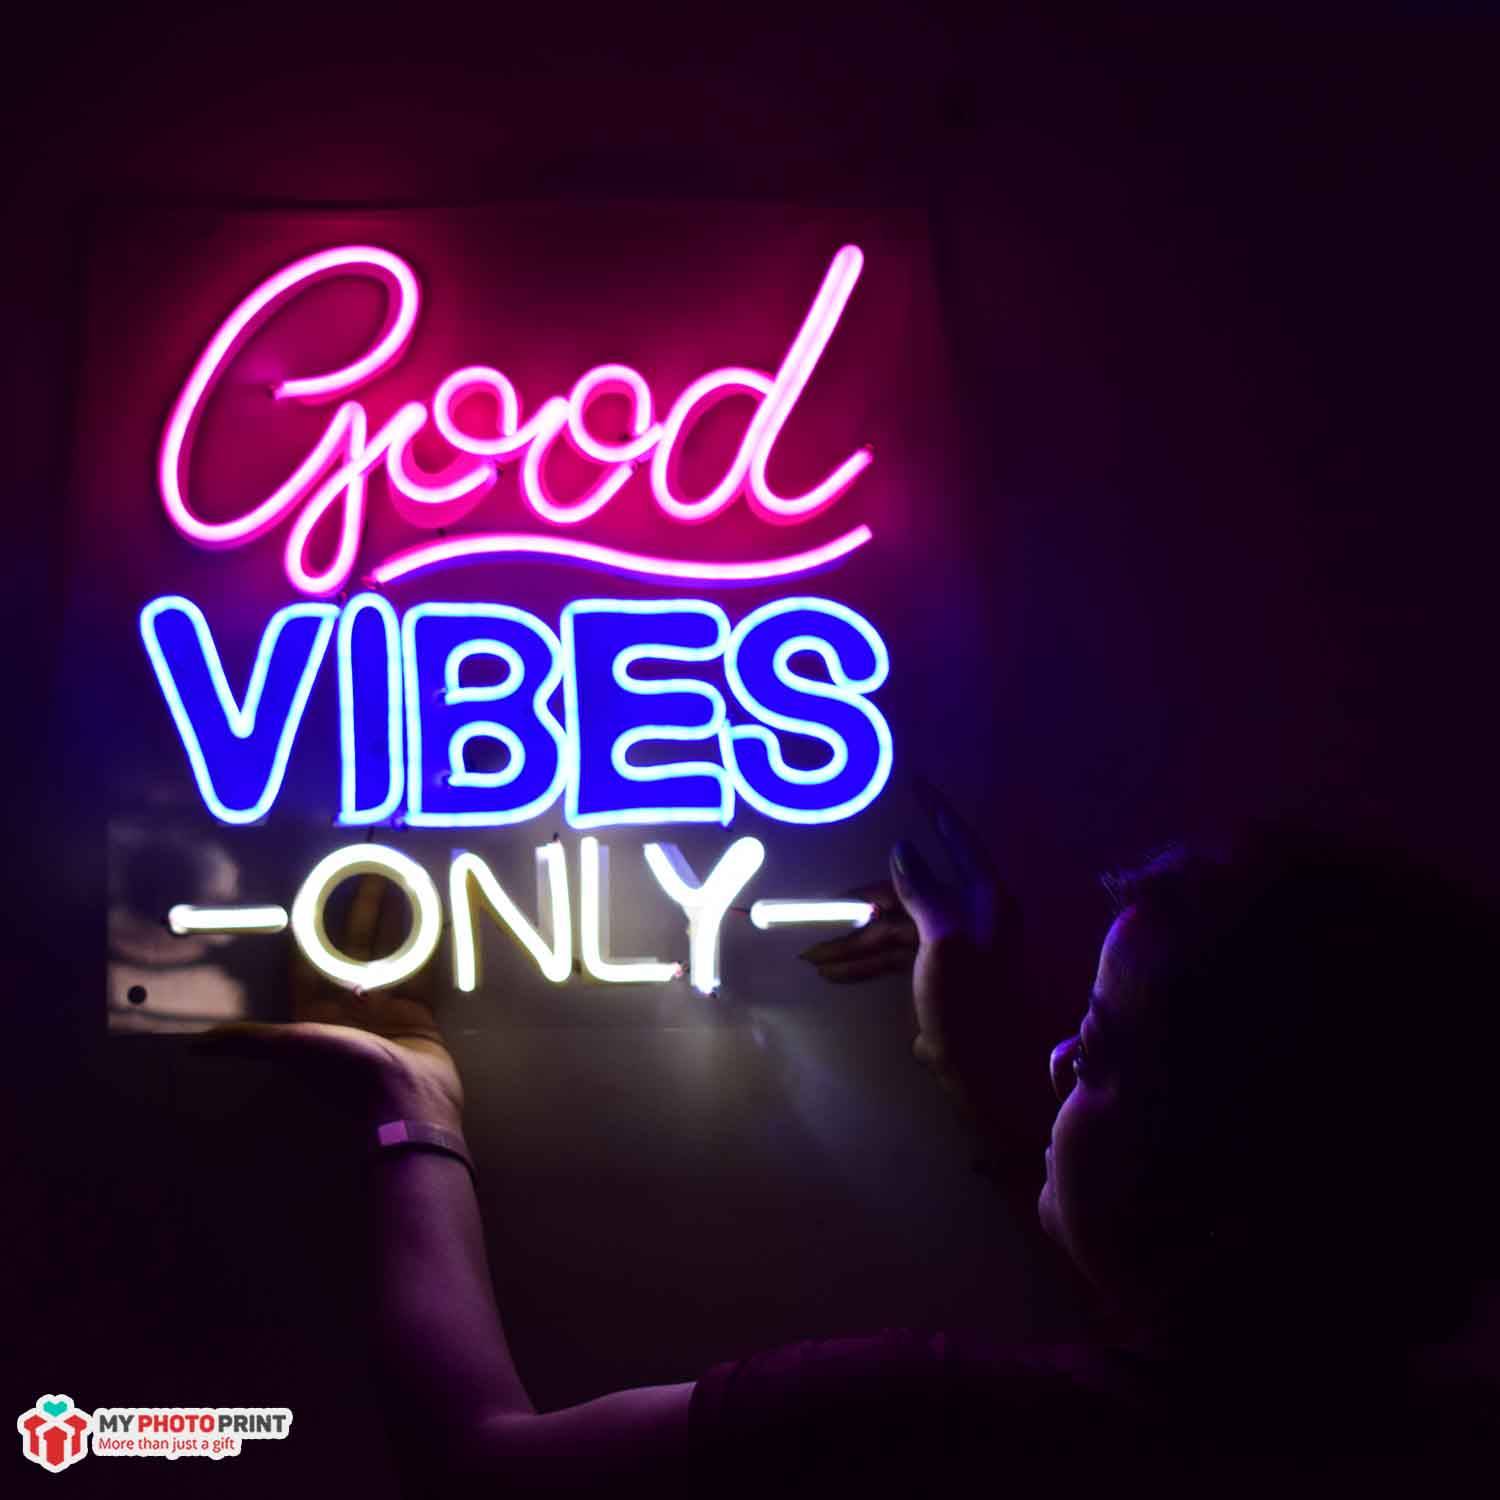 Neon Good Vibes Only 2.0 Led Neon Sign Decorative Lights Wall Decor